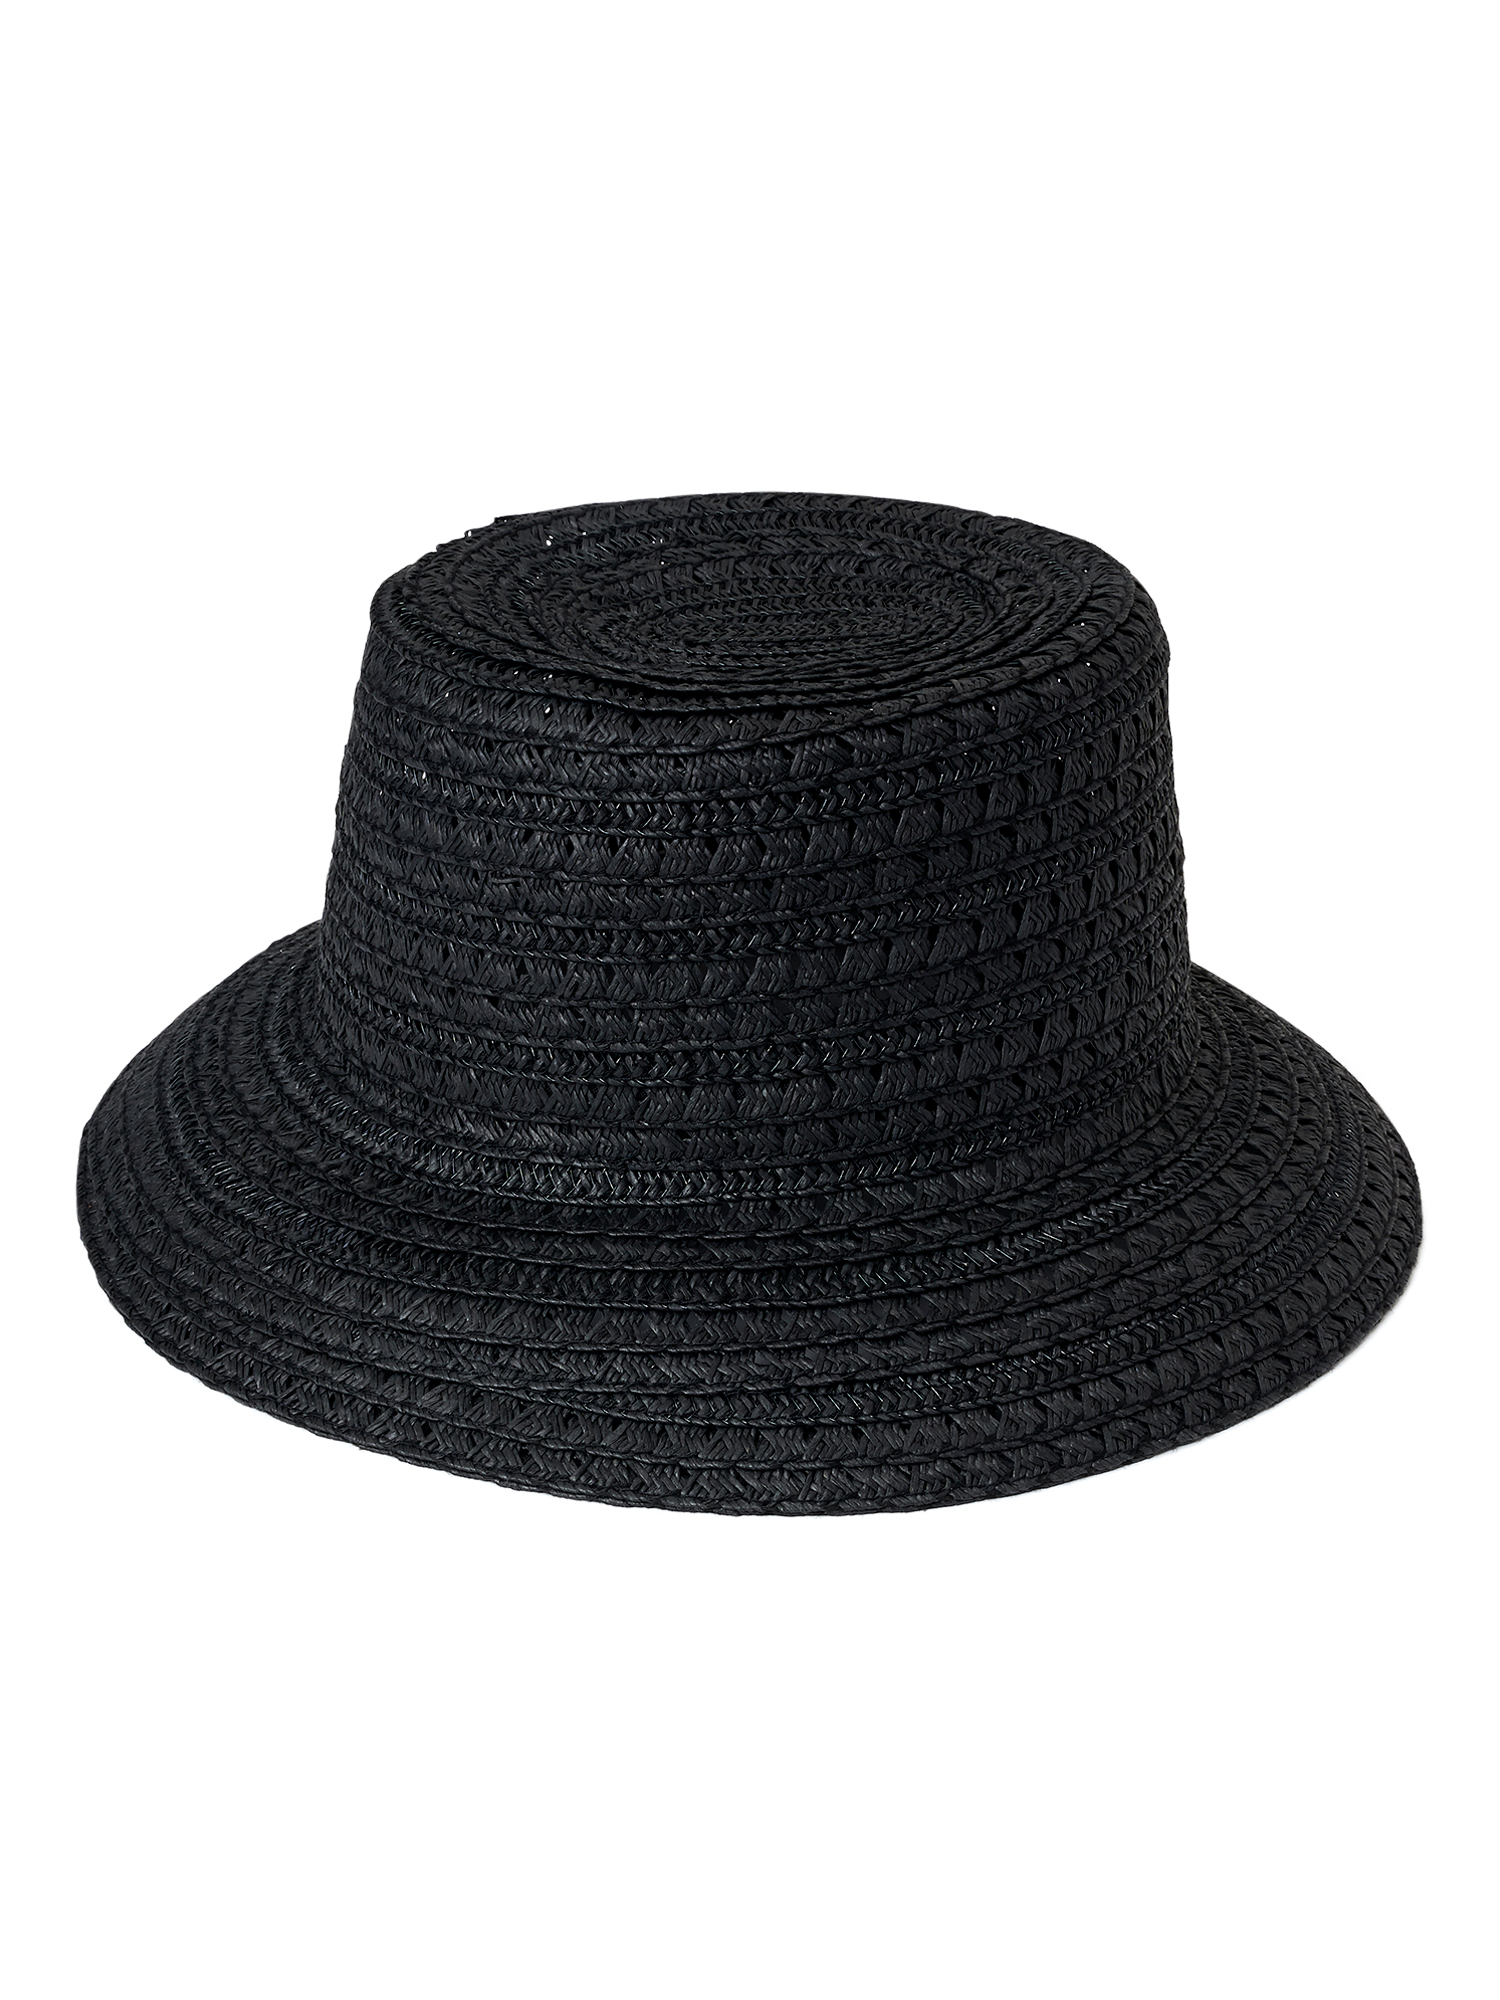 Time and Tru Adult Women's Straw Bucket Hat - image 1 of 3